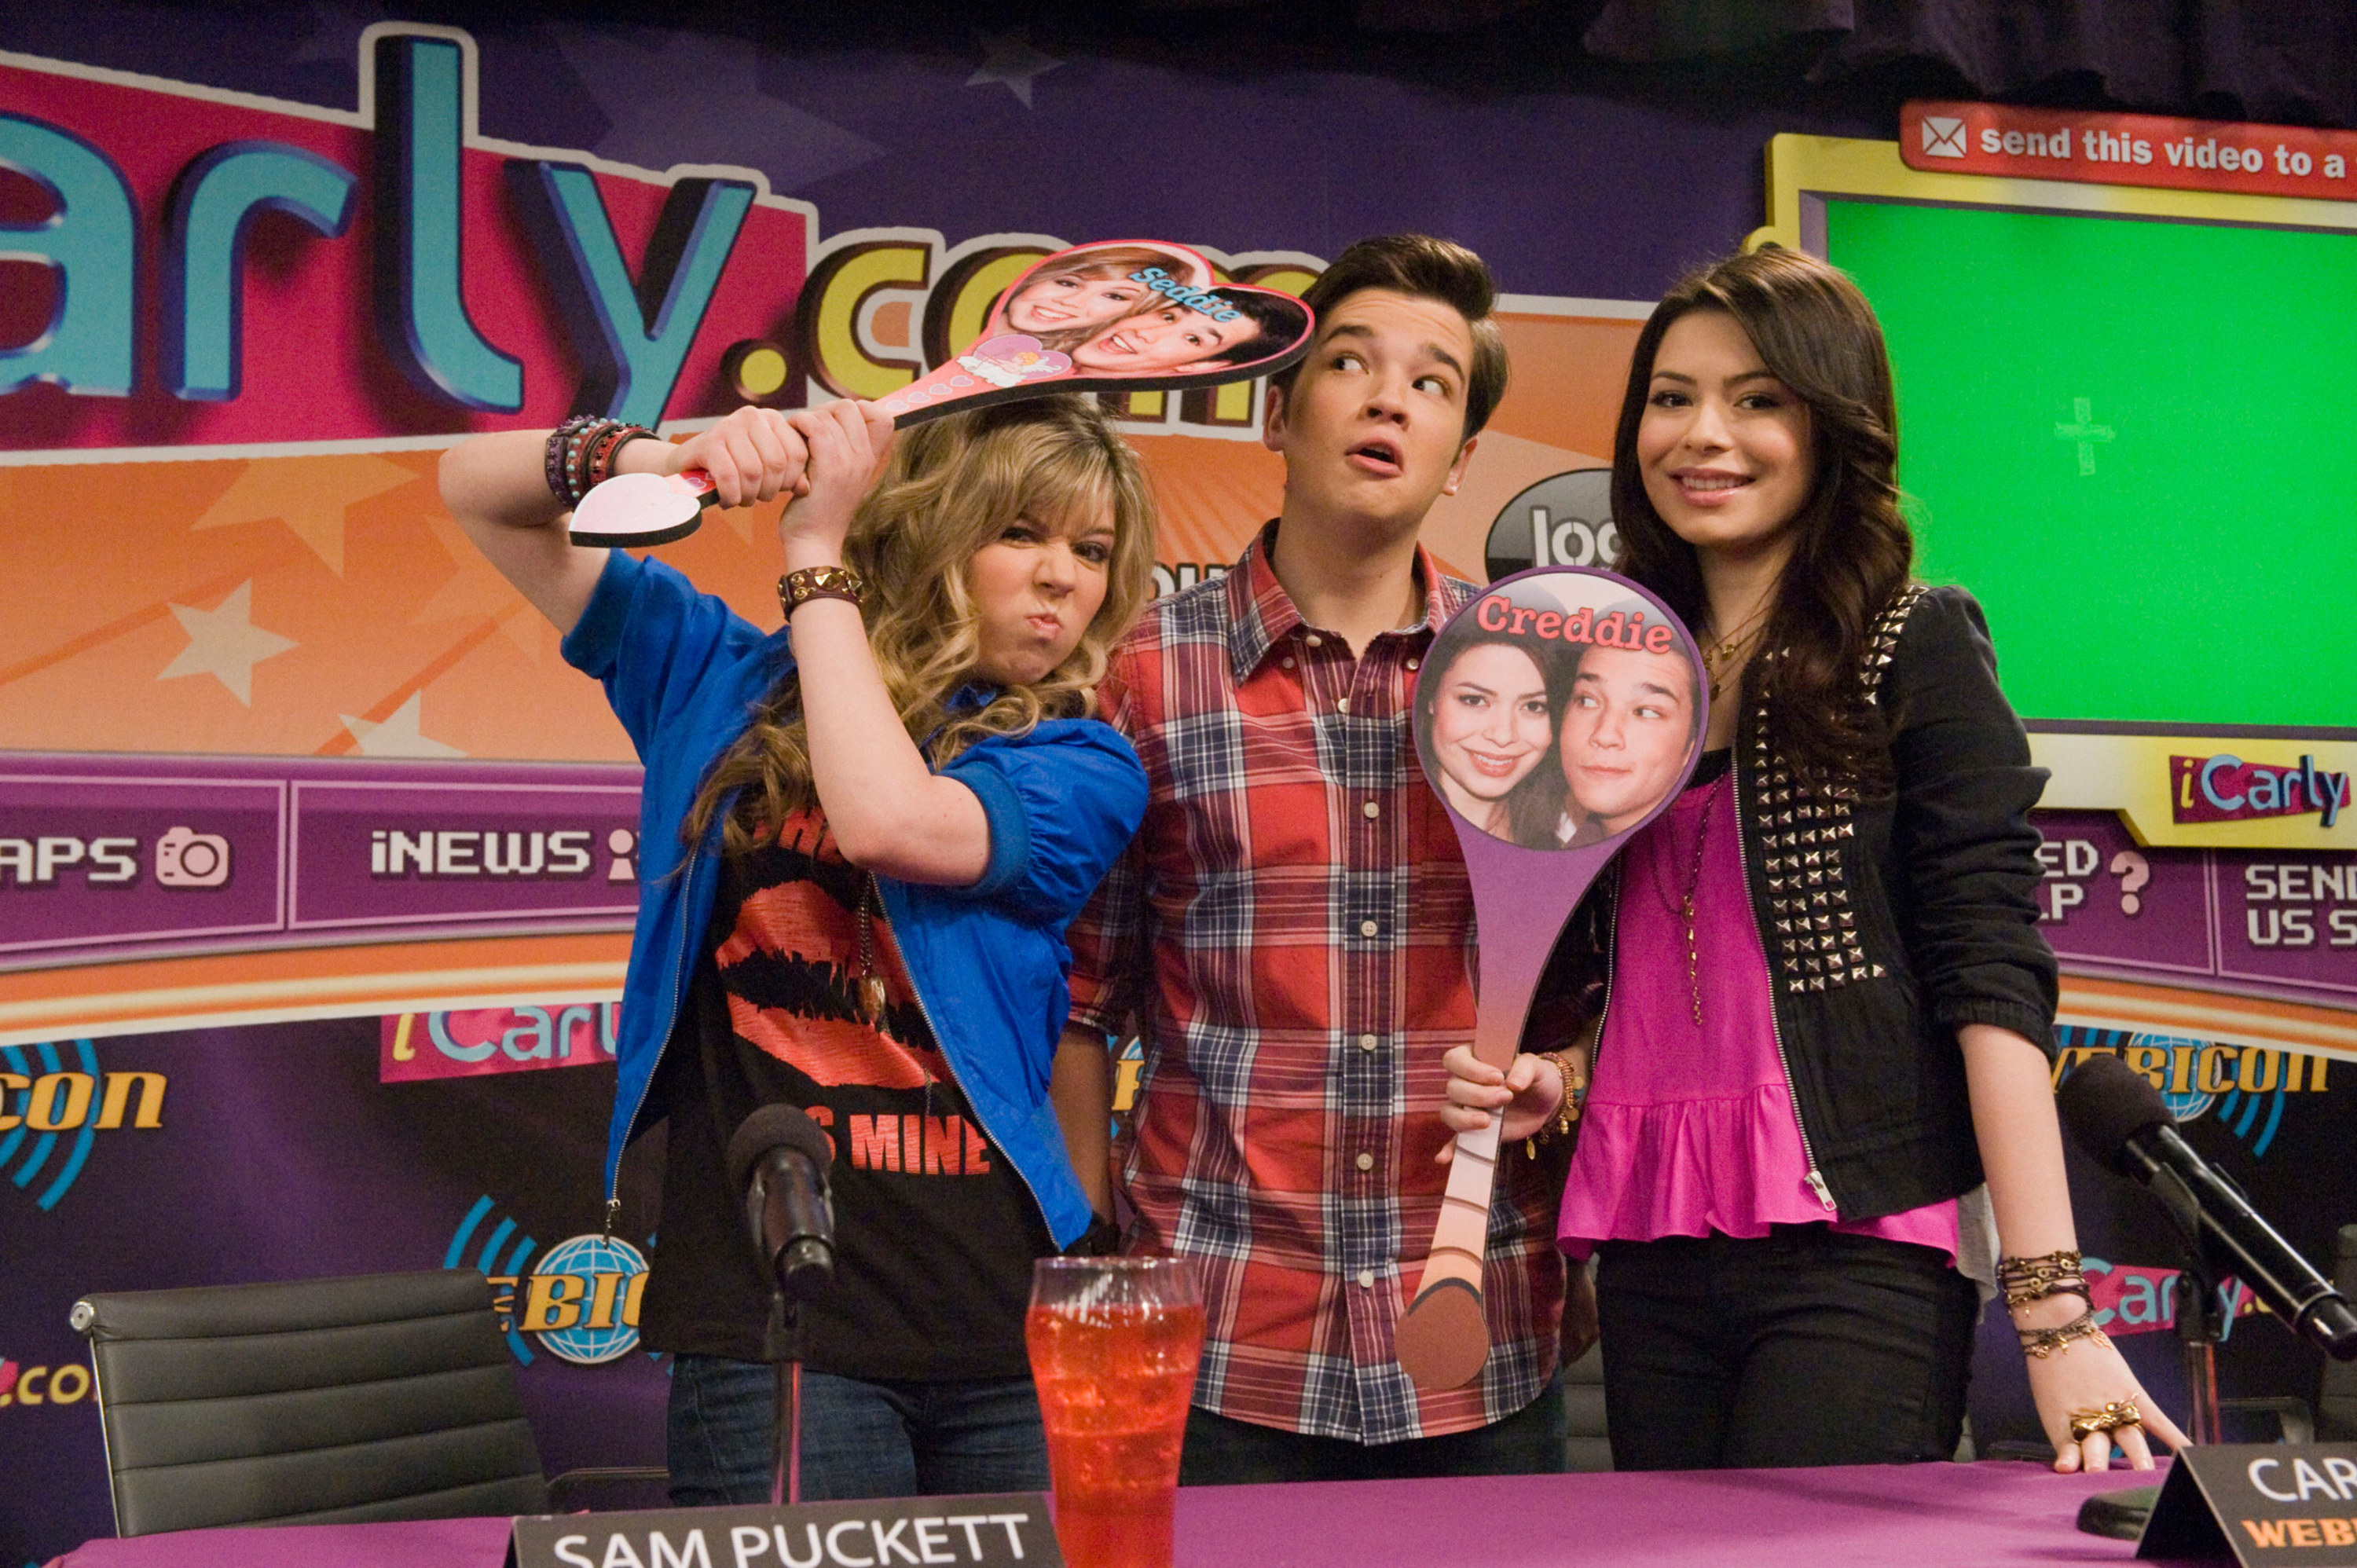 The Best iCarly Episodes. icarly s6e2. 